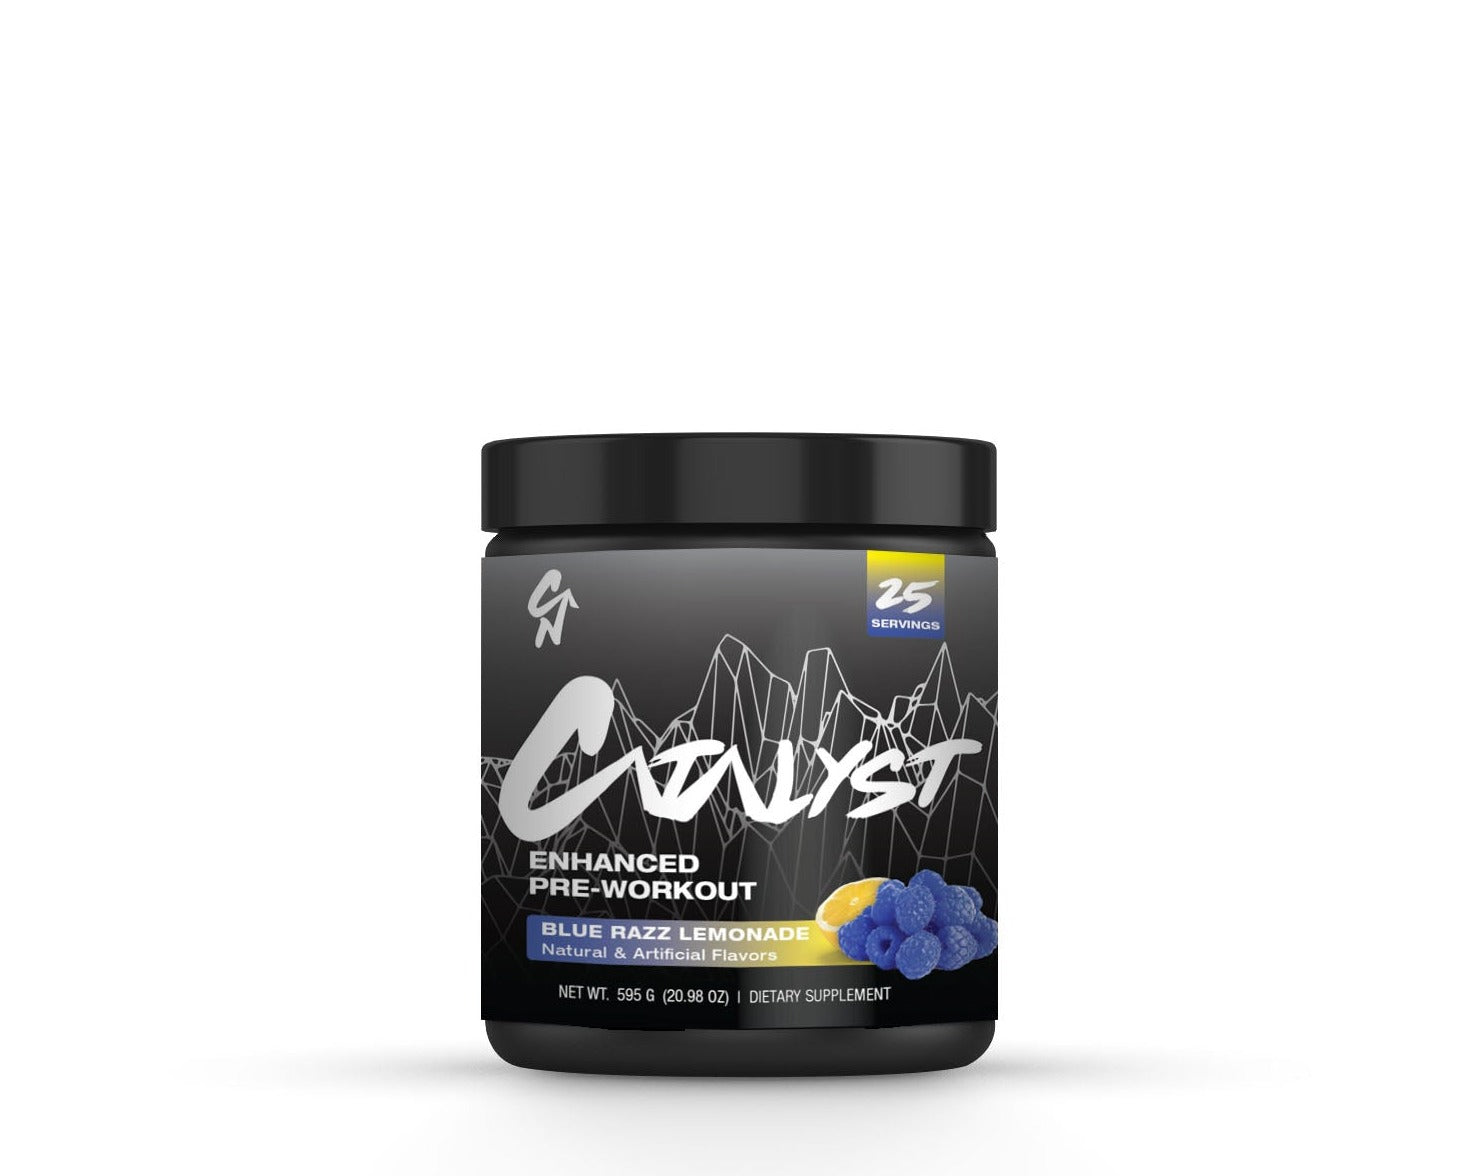 Catalyst Pre-Workout